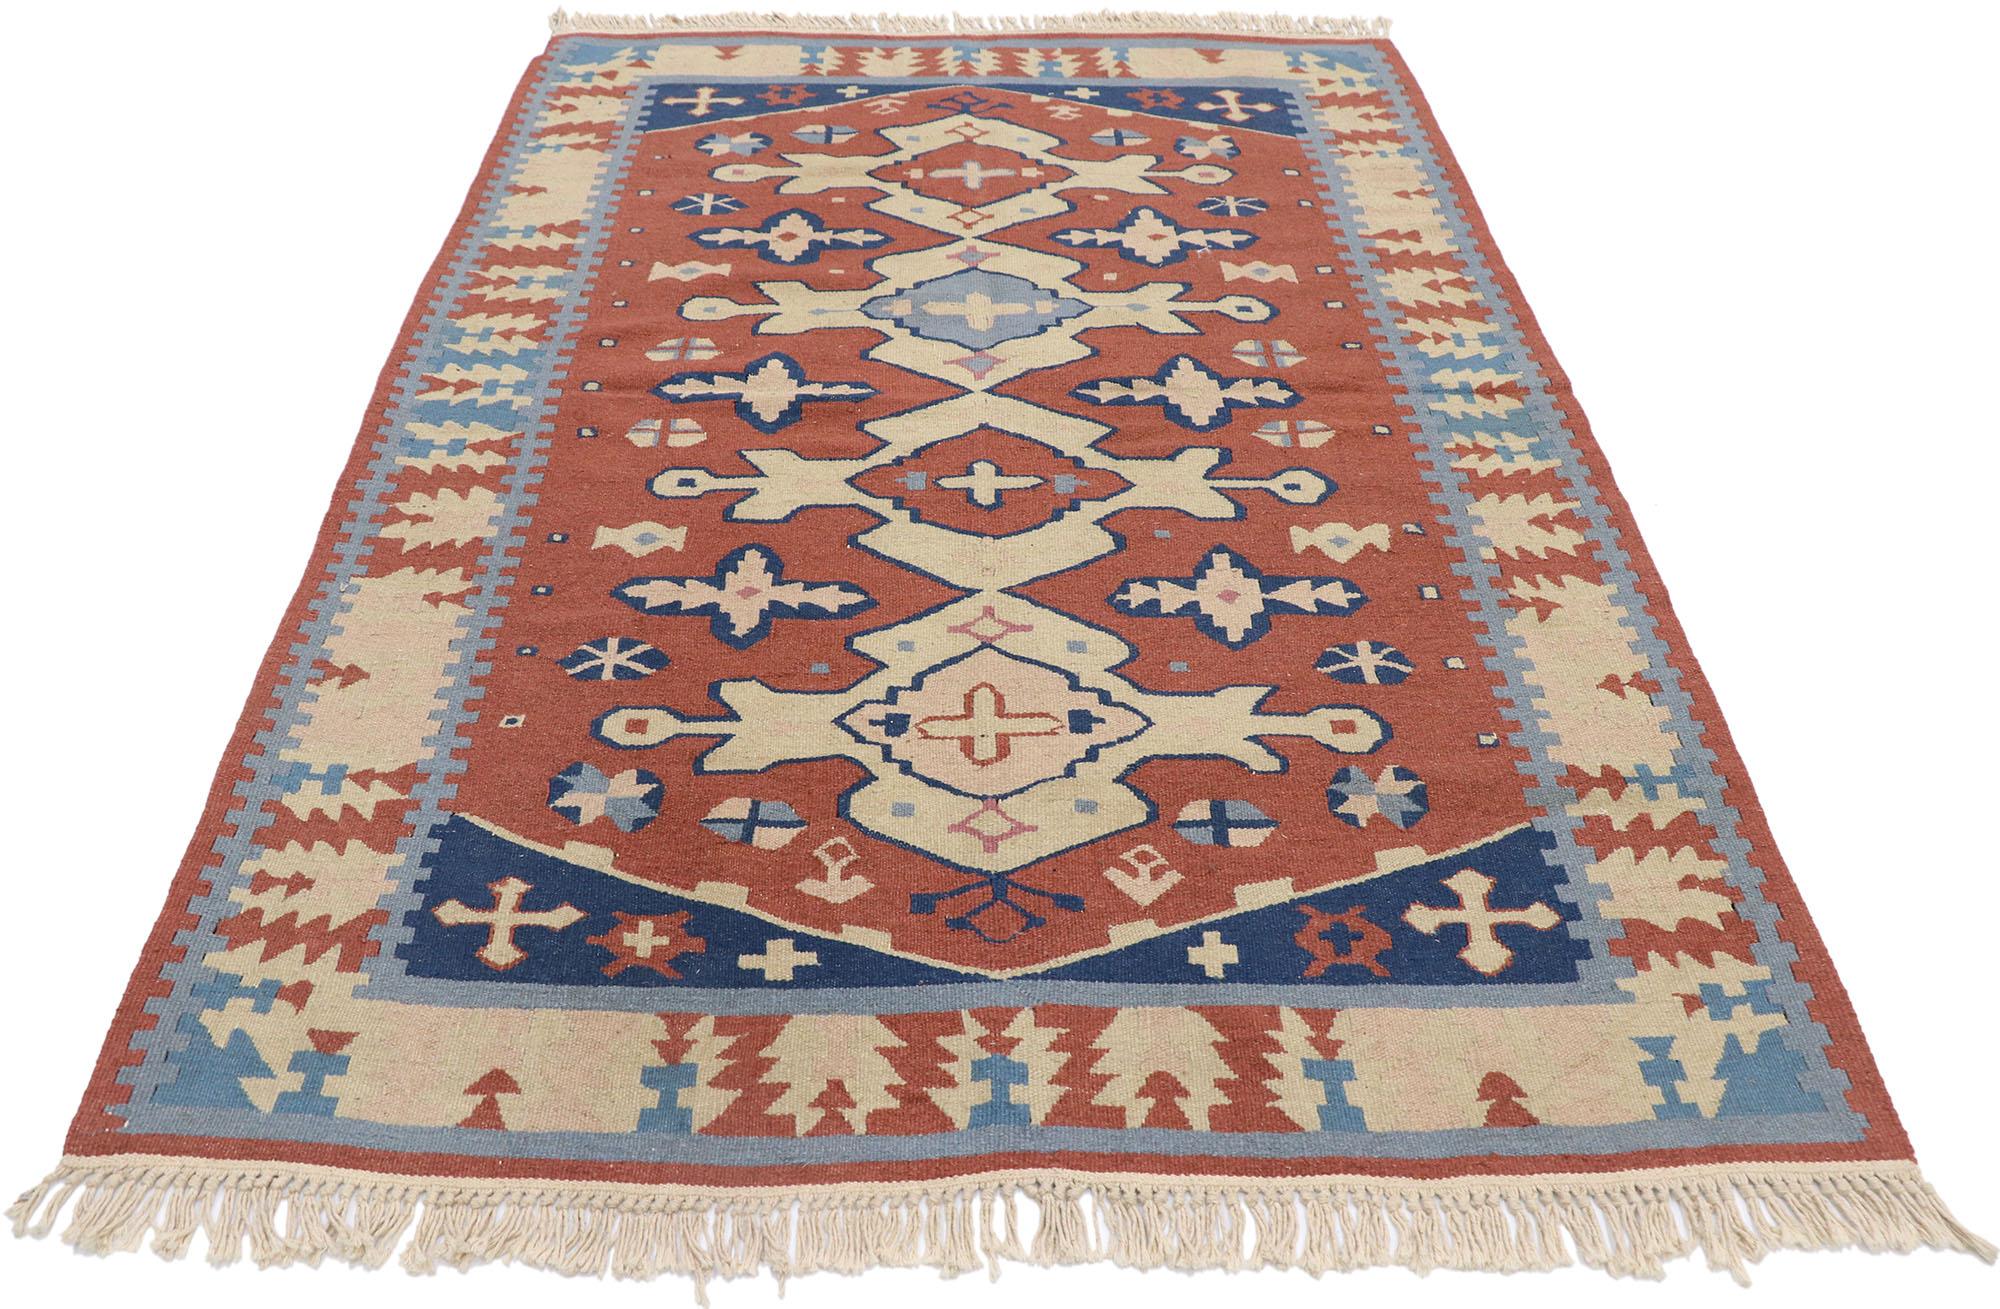 Hand-Woven Vintage Persian Shiraz Kilim Rug with Rustic Tribal Style For Sale